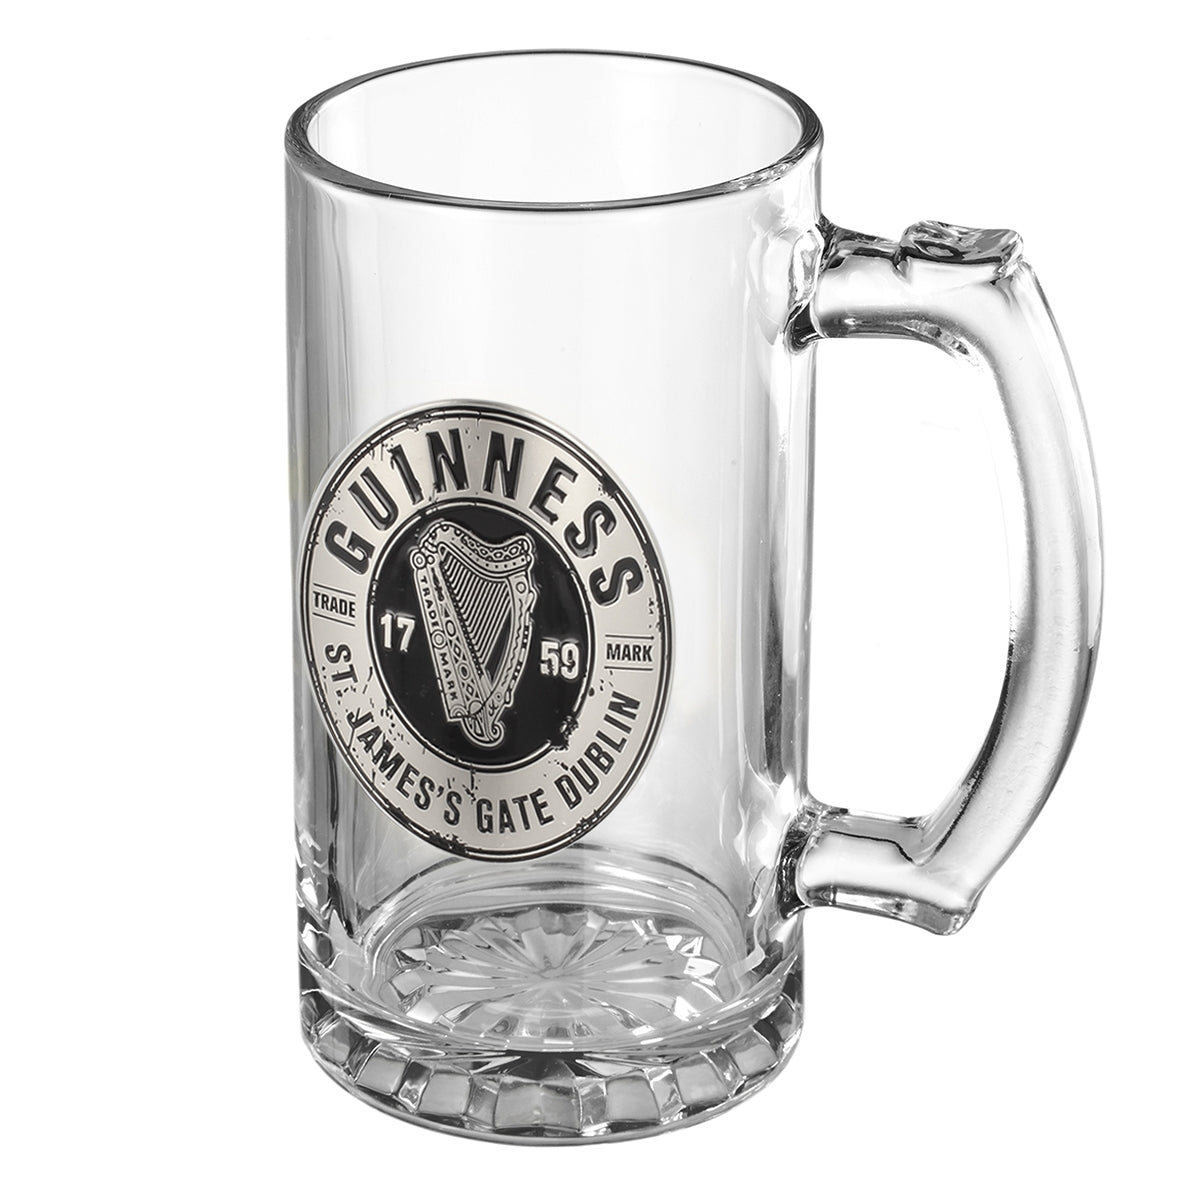 A Guinness Pewter Logo Tankard with the Guinness logo.